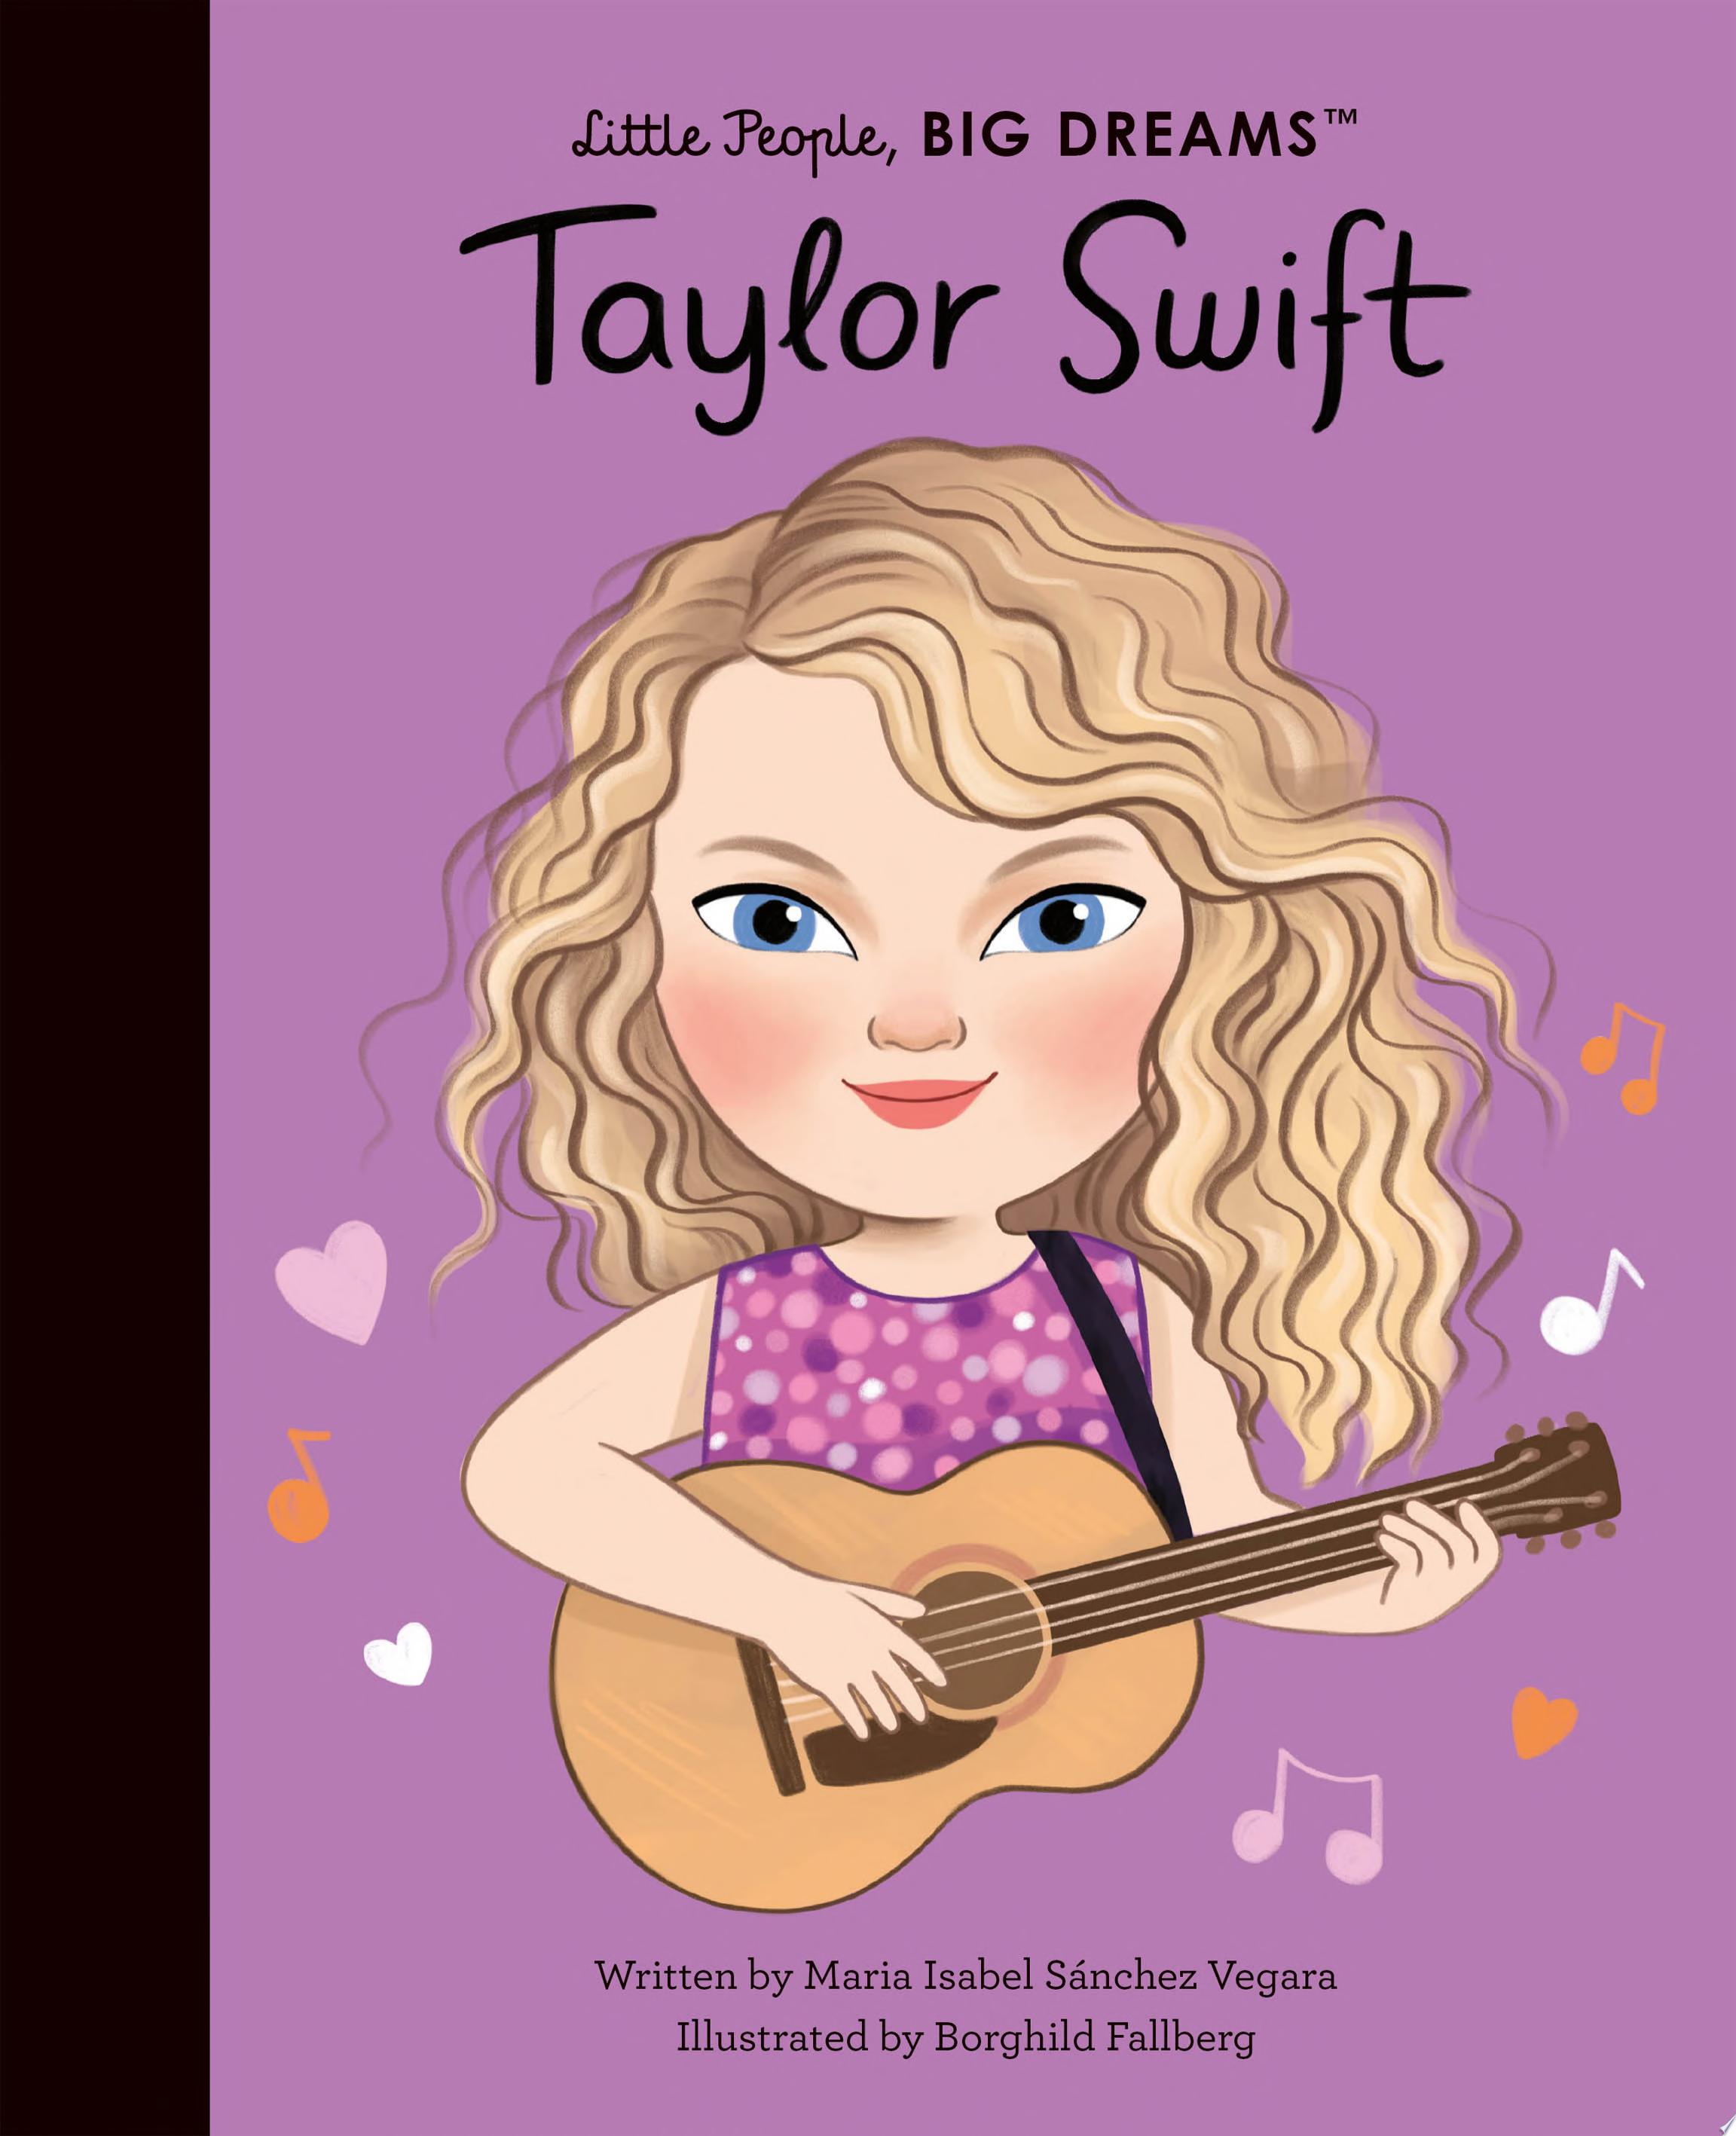 Image for "Taylor Swift"